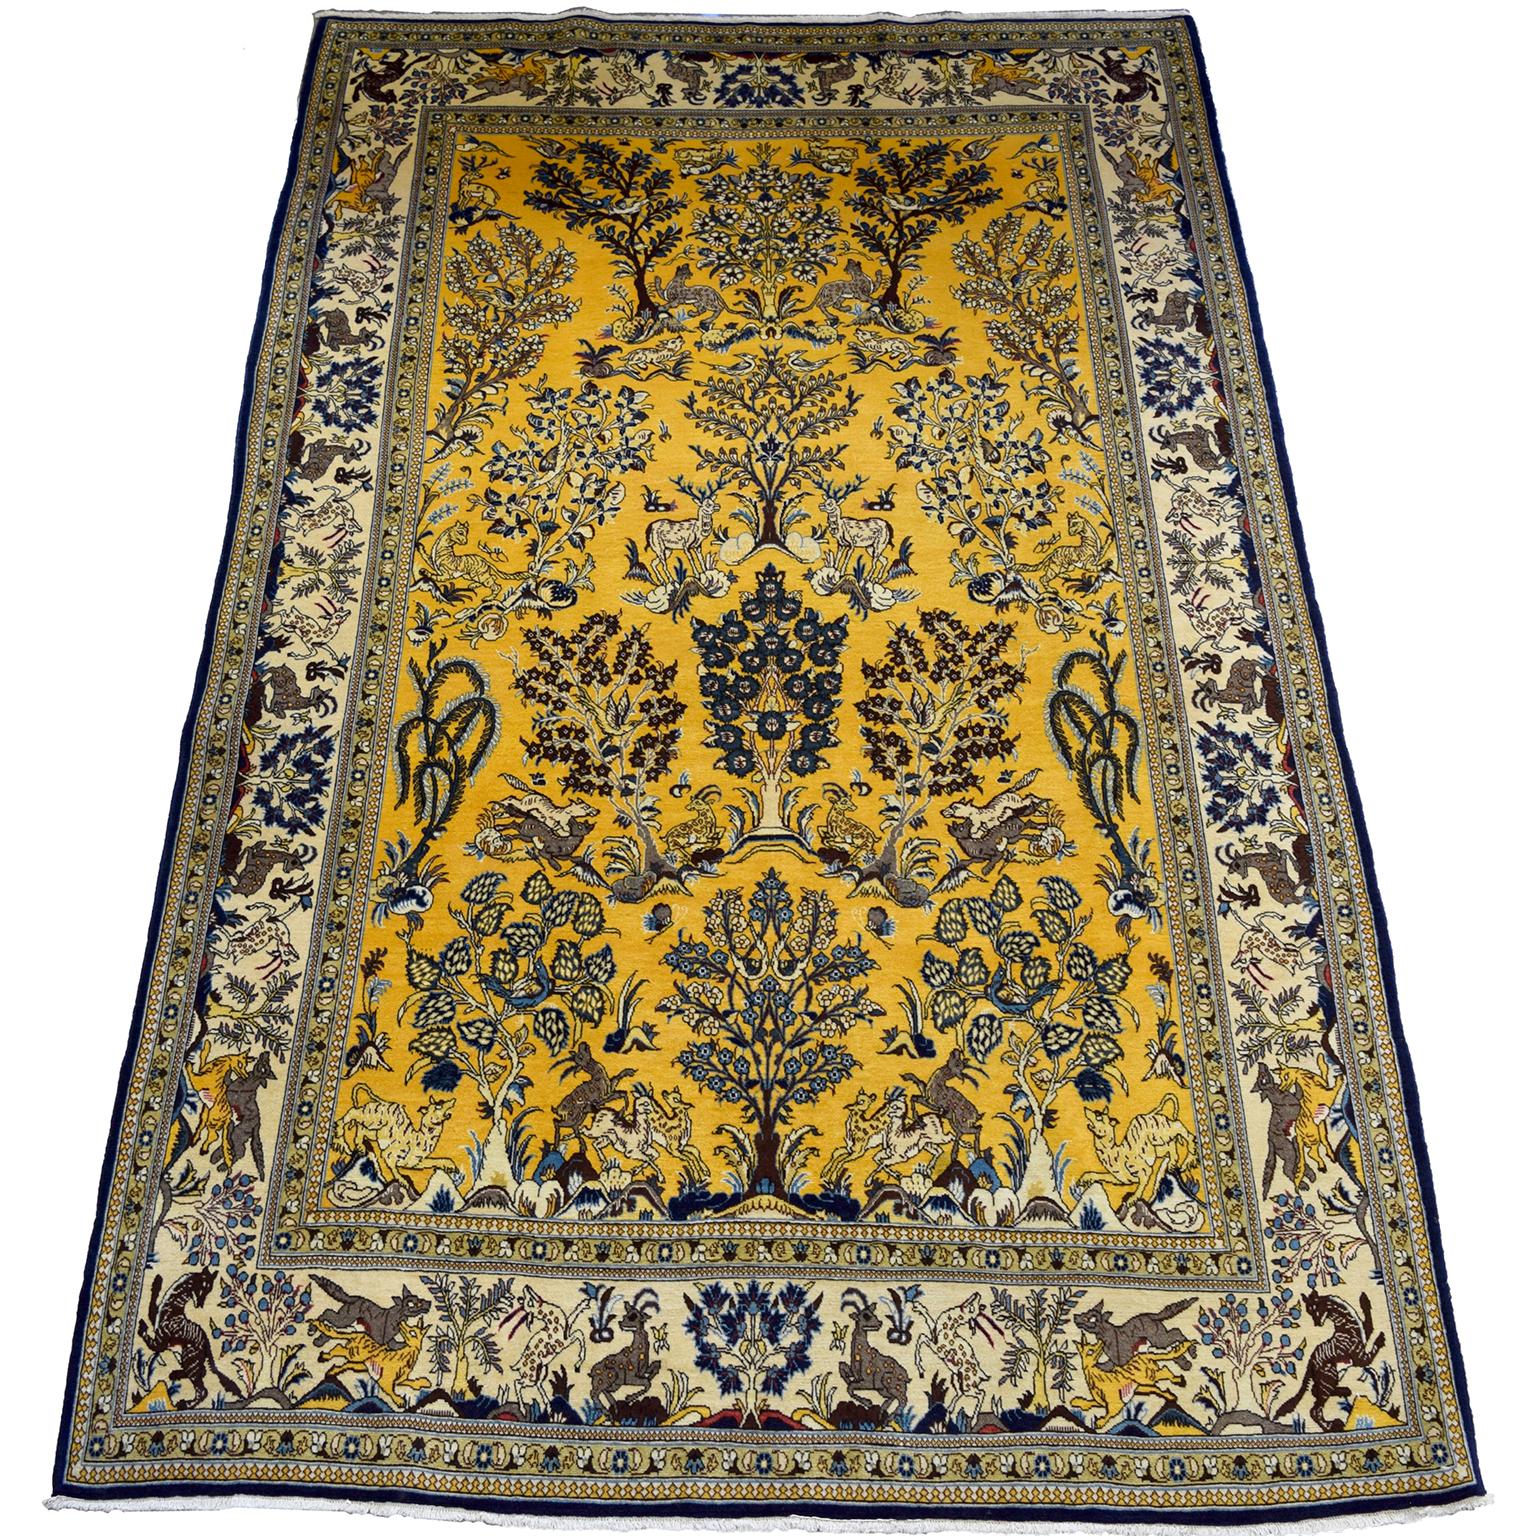 Semi-antique 1940s Gold and Blue Ghom Tree of Life Wool Persian Rug, 8' x 10' For Sale 6